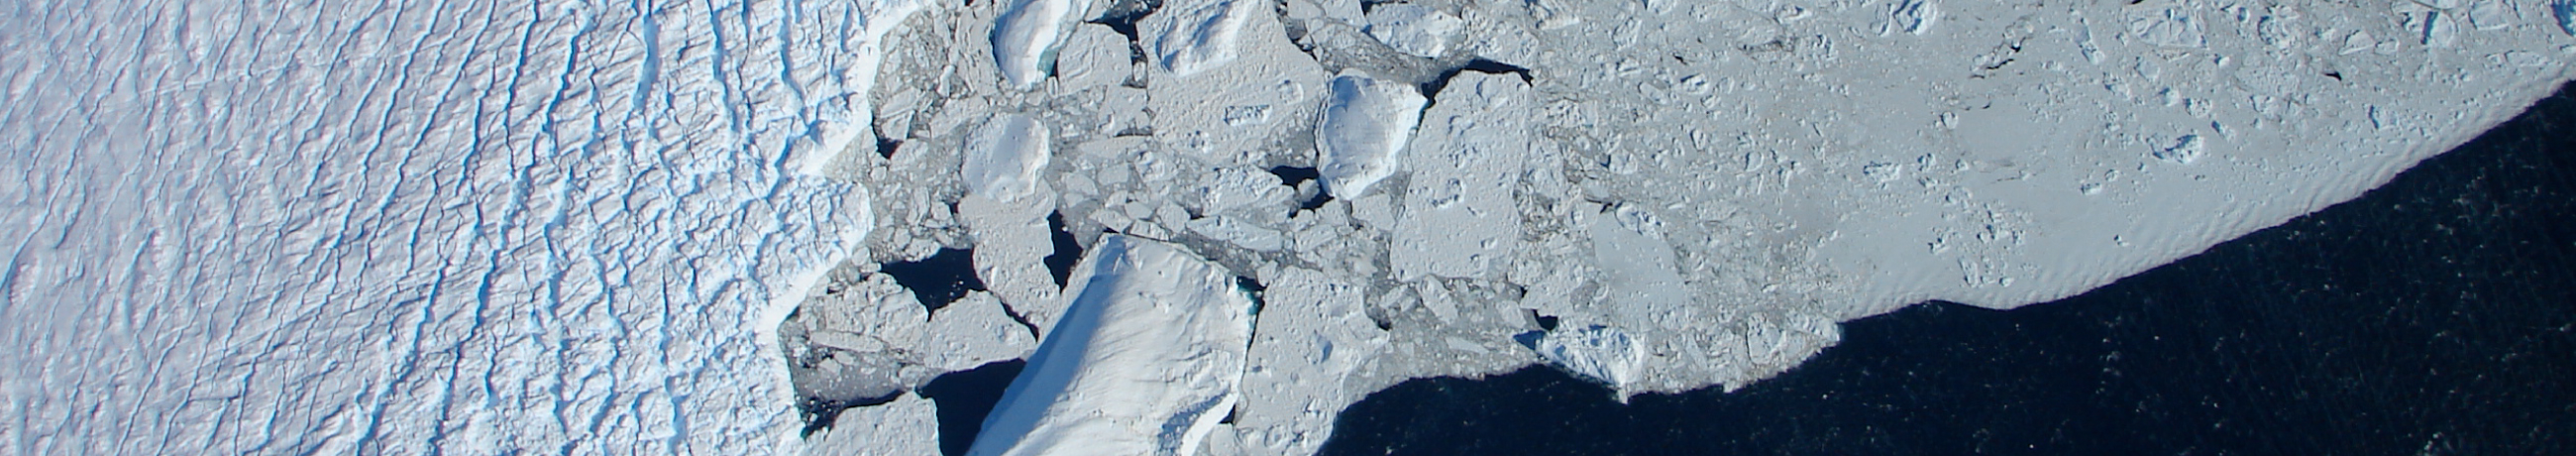 Icescape viewed from above